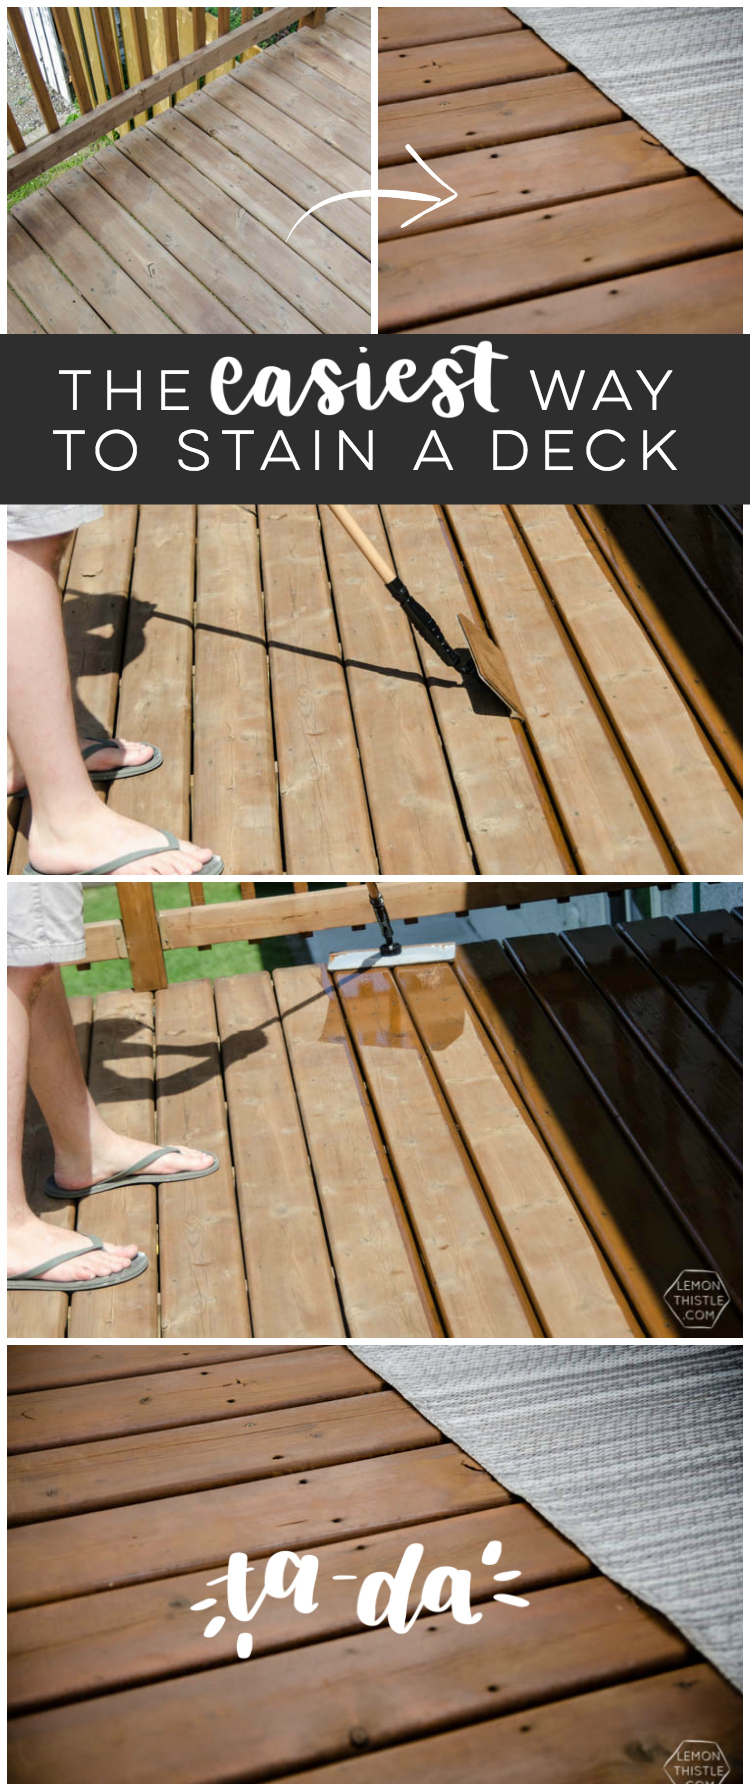 Tips on wooden deck materials and finishing (and refinishing!)